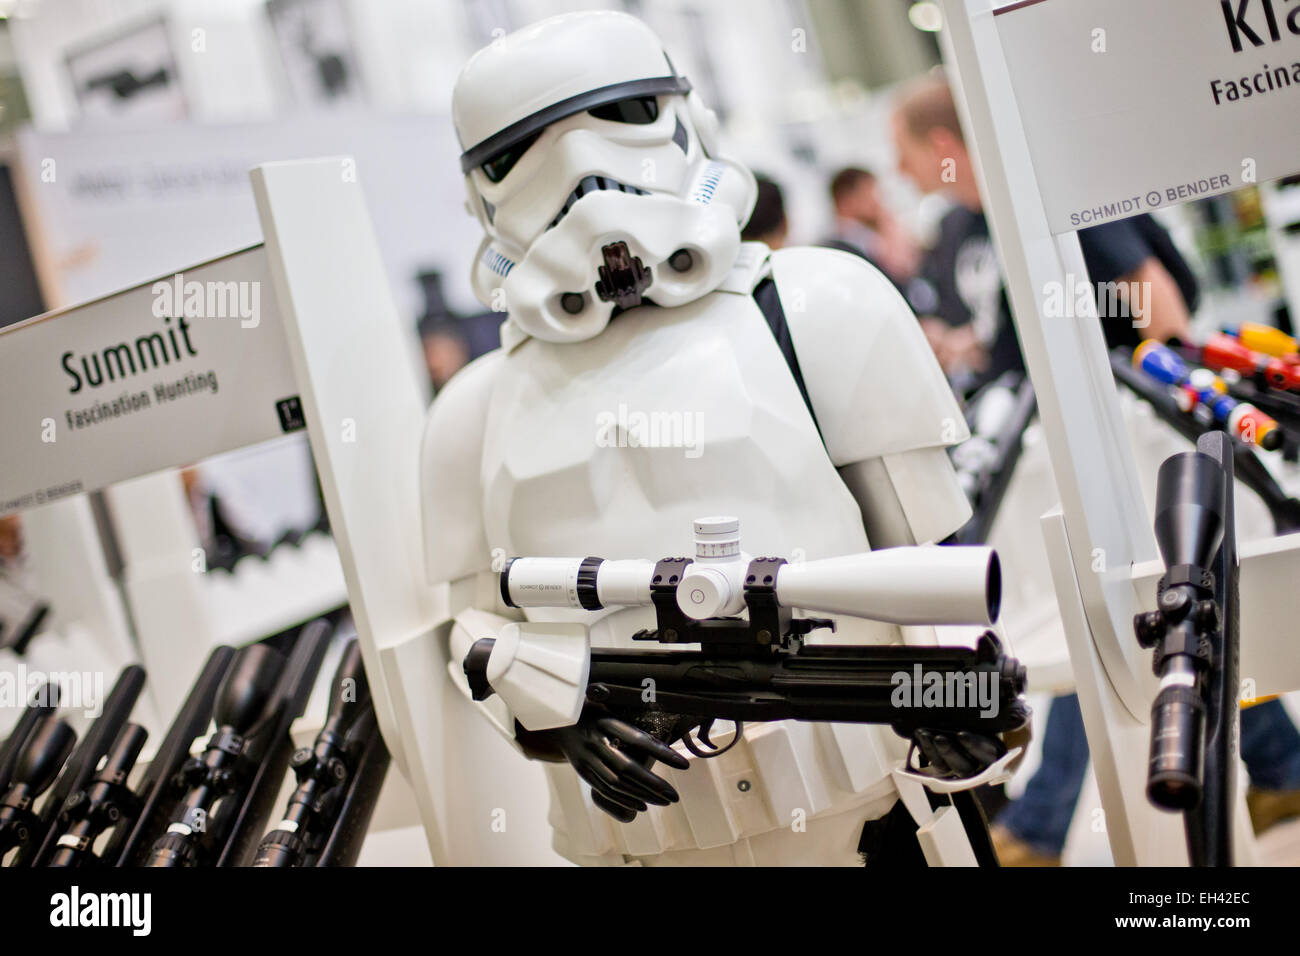 A life-sized doll depicting a storm trooper of the 'Star Wars' films holds a telescopic sight of 'Schmidt und Bender' in its hands at the hunting and sporting gun fair IWA OutdoorClassics in Nuremberg, Germany, 6 March 2015. Photo:  Daniel Karmann/dpa Stock Photo